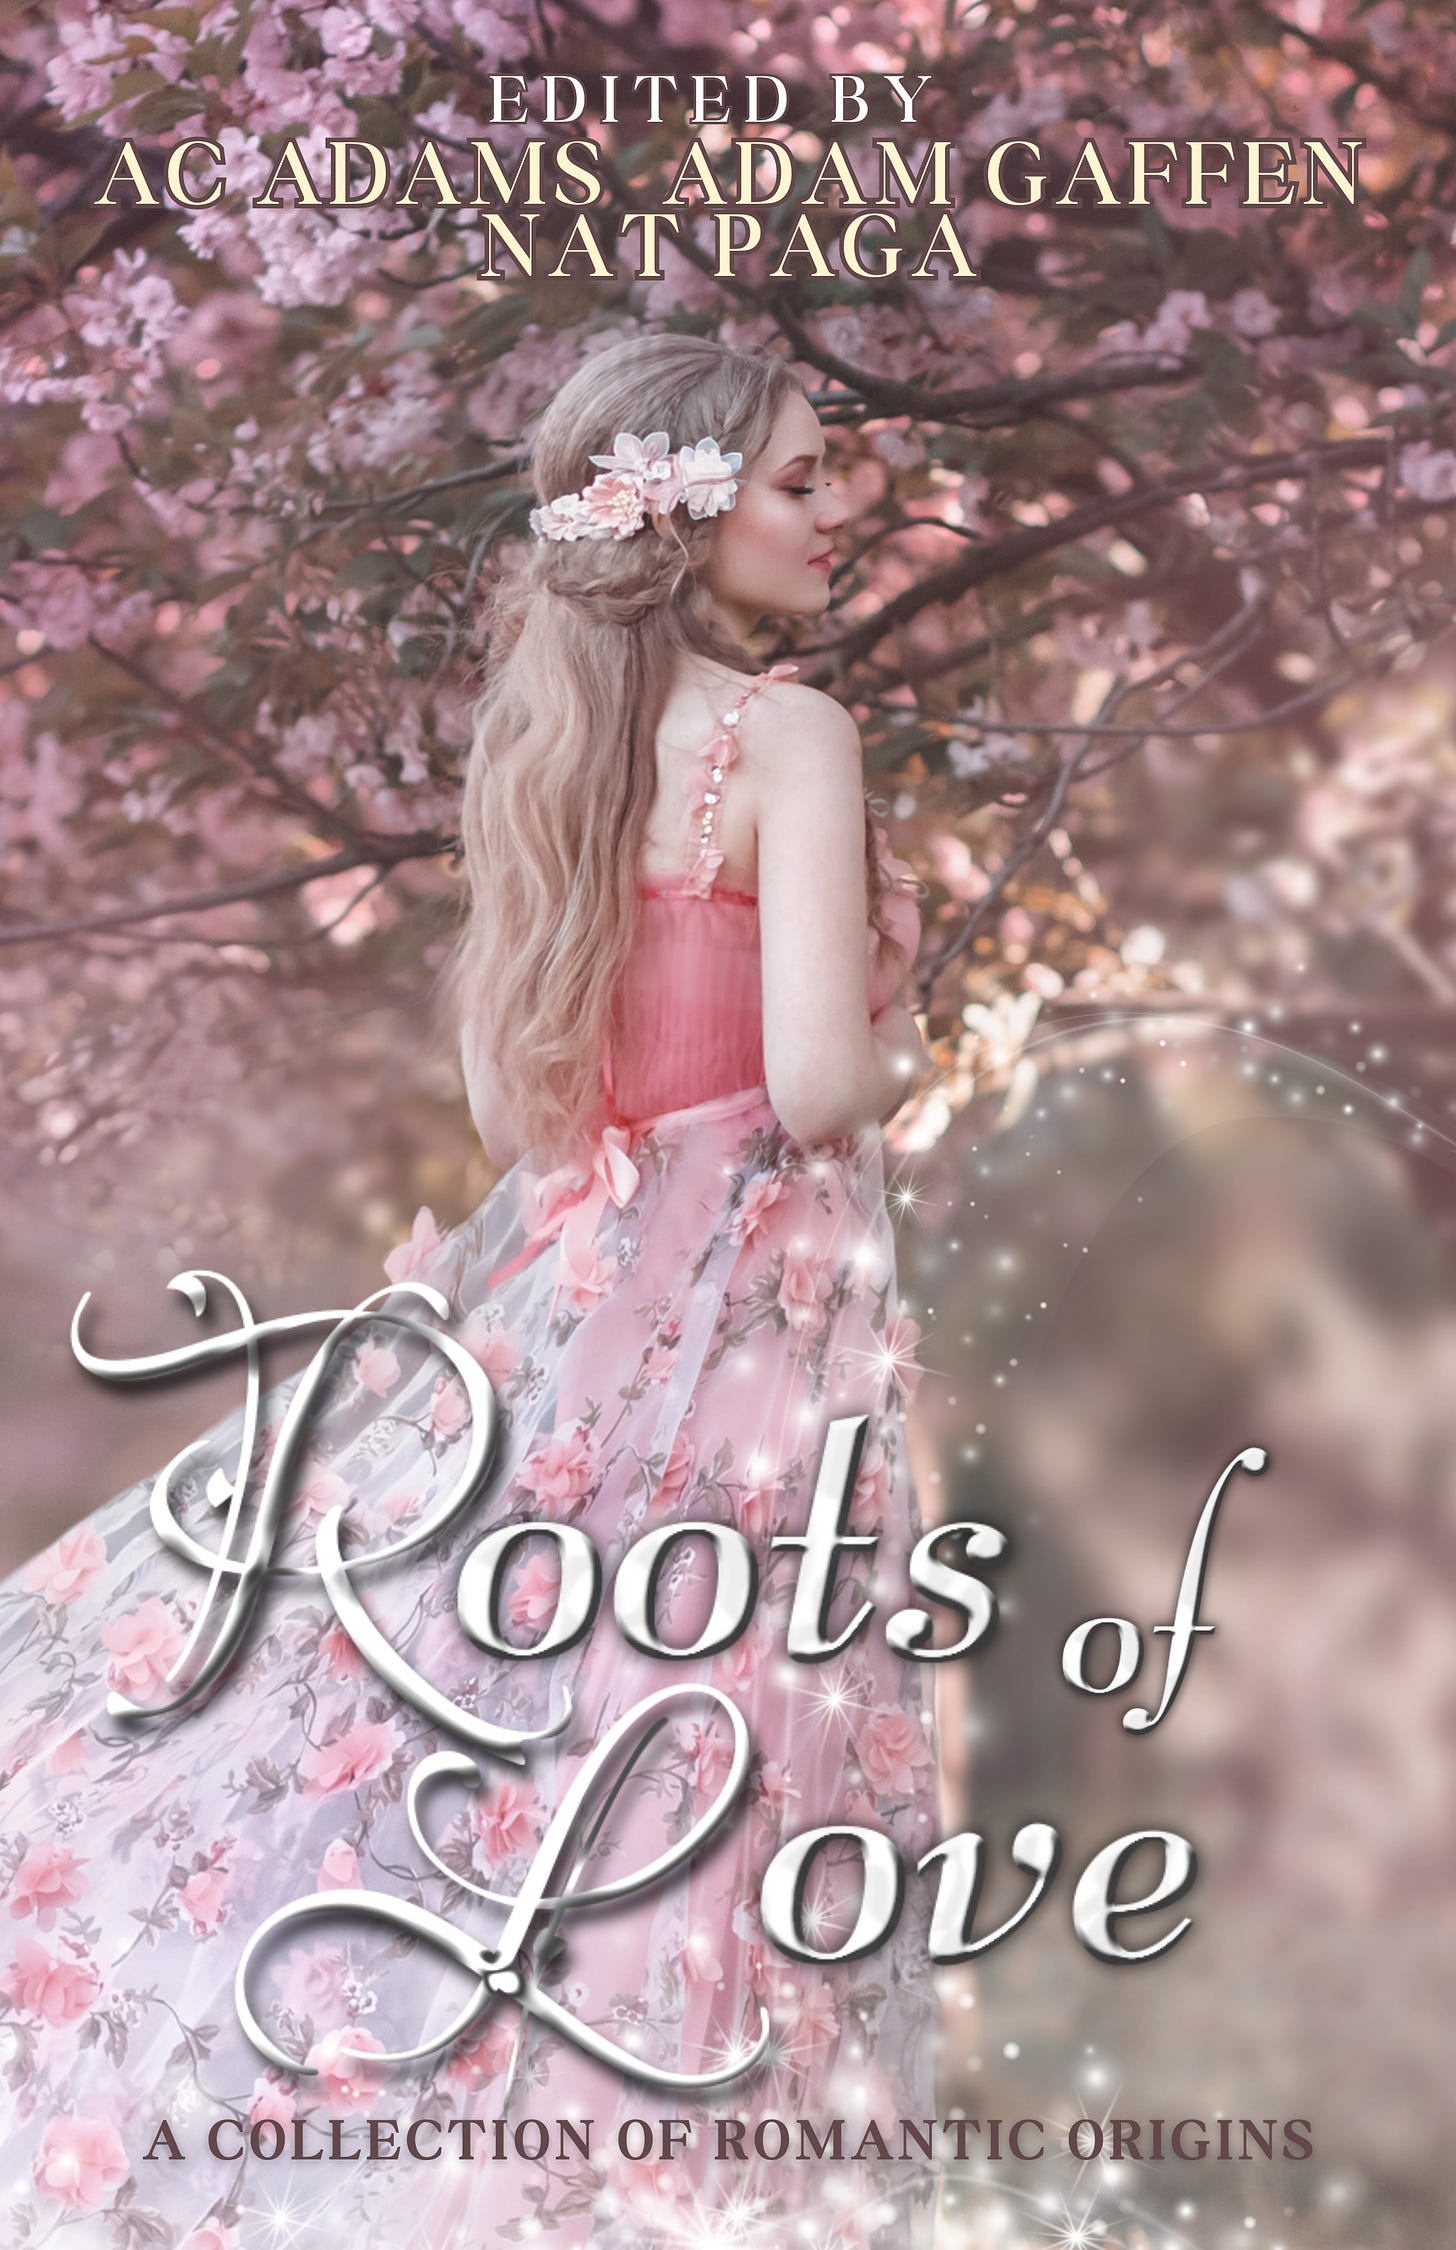 Text: Edited by AC Adams Adam Gaffen Nat Paga. The Roots of Love, A Collection of Romantic Origins. Book Cover Image: A blonde woman with fair skin in pink on a backdrop of a pink flowering tree.